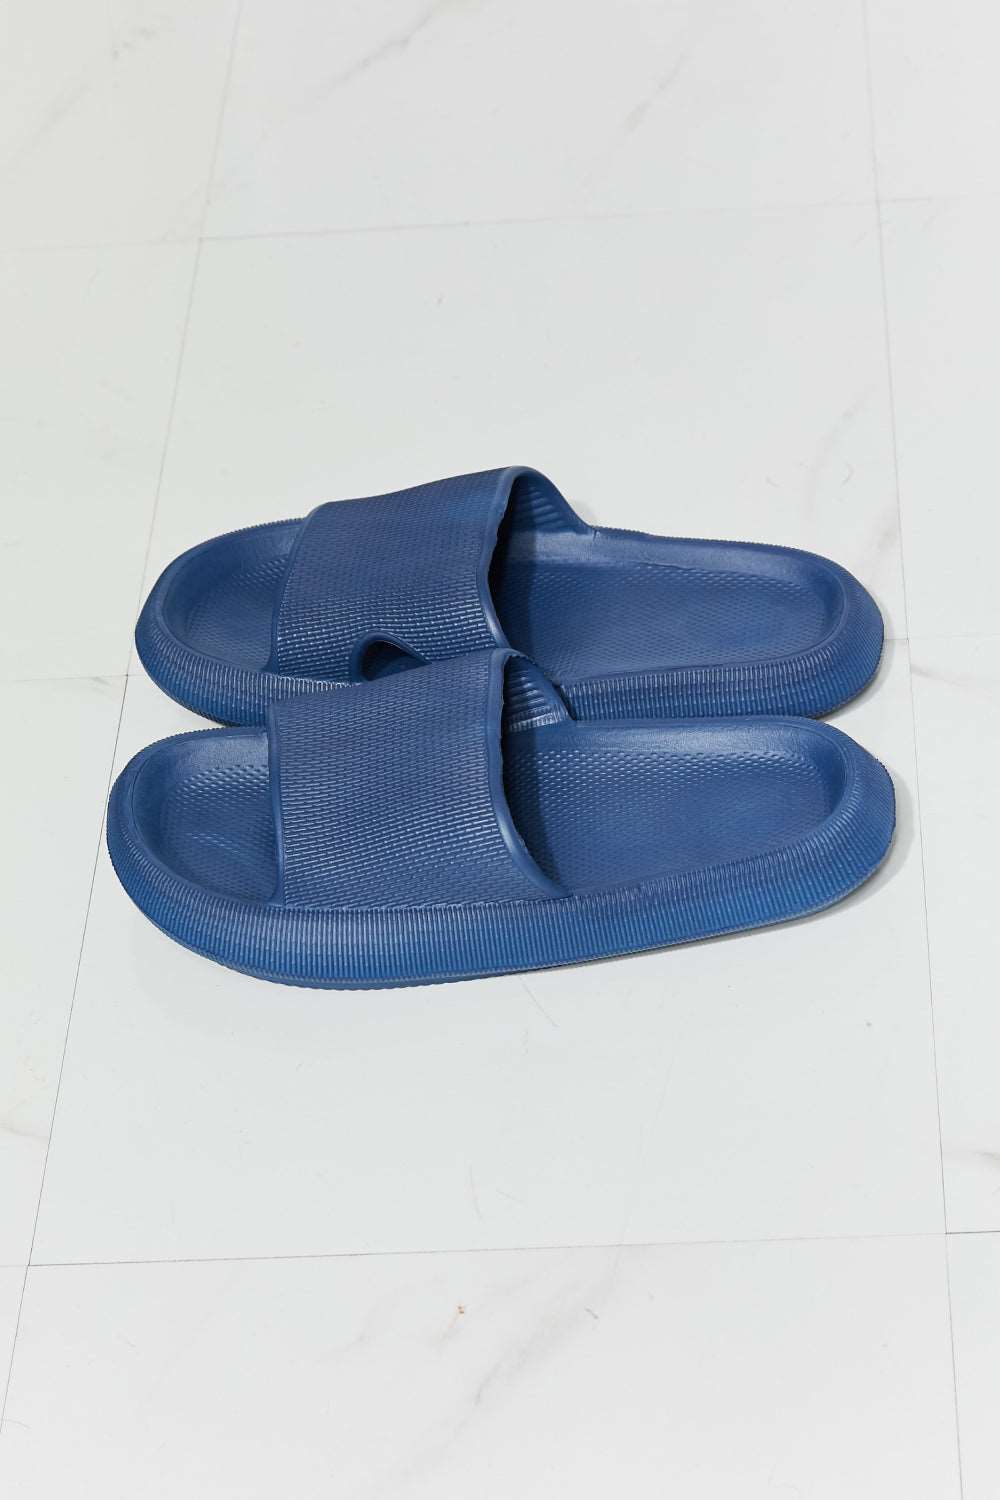 Arms Around Me Open Toe Slide in Navy - Shop Shea Rock